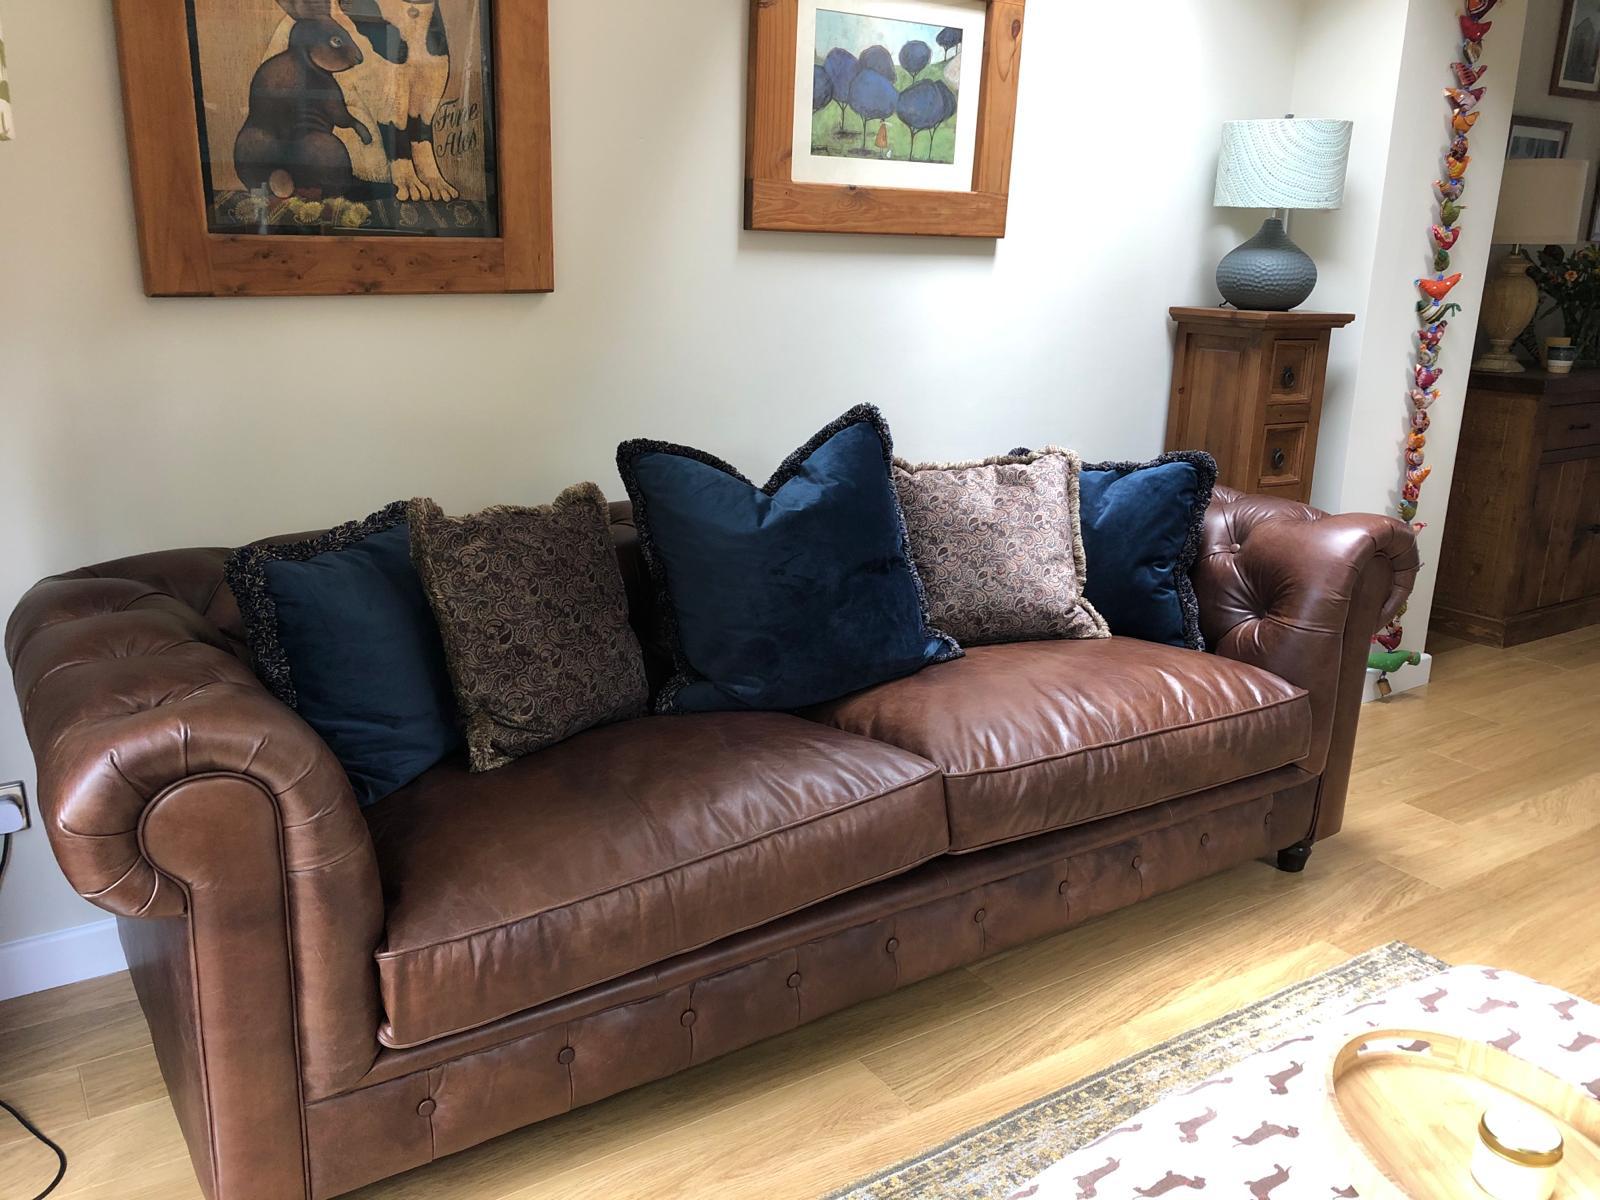 Chesterfield Halo Earl Sofa in Antique Whisky from Top Secret Furniture